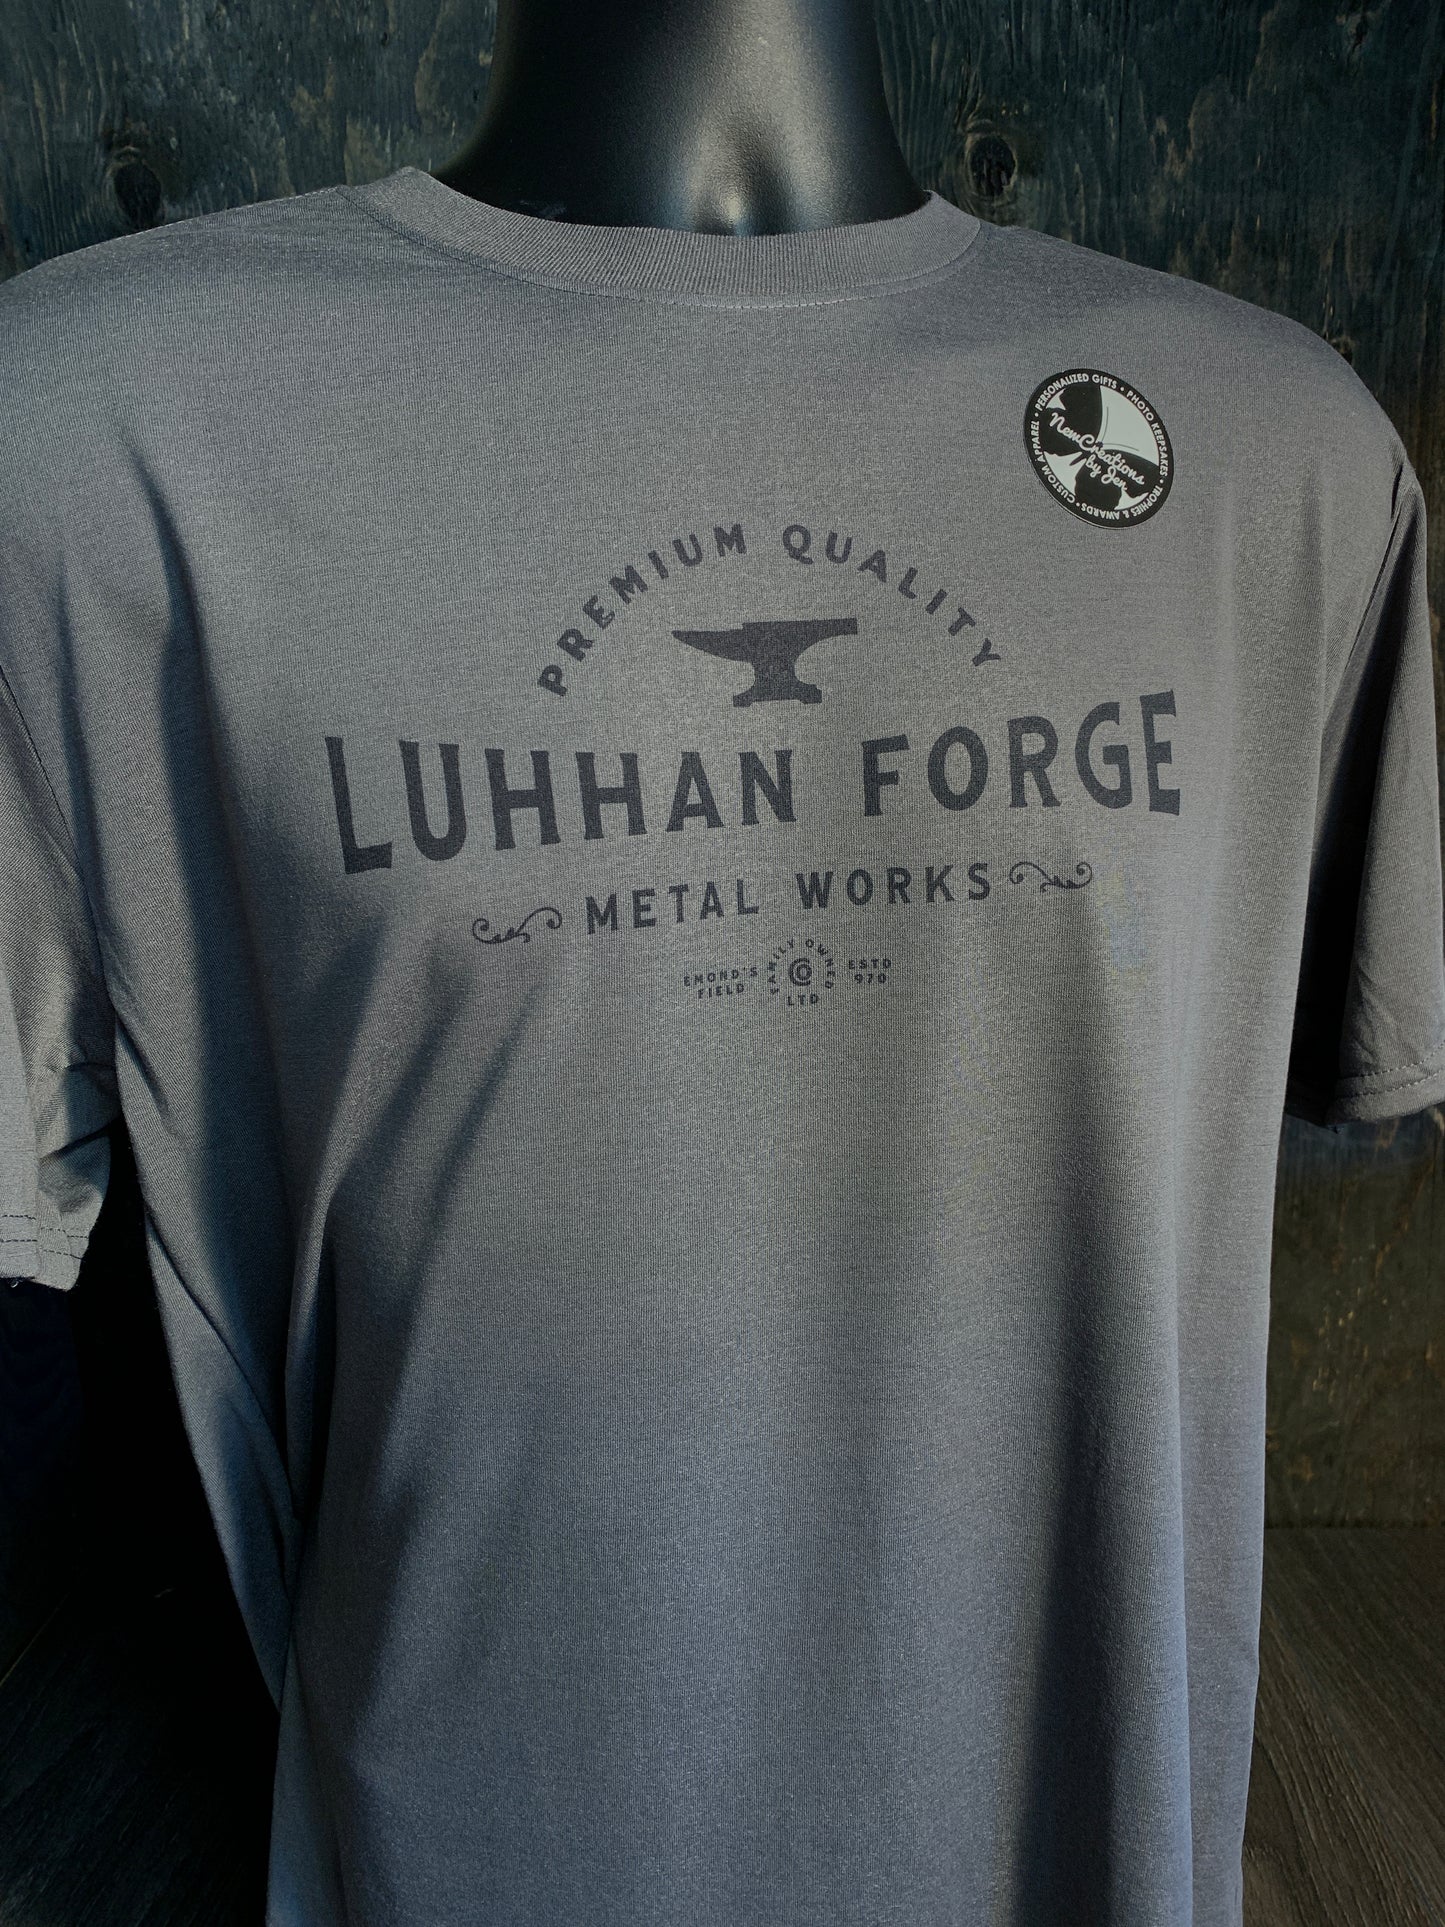 Luhhan Forge - Wheel of Time Inspired  Souvenir Lightweight  Tees